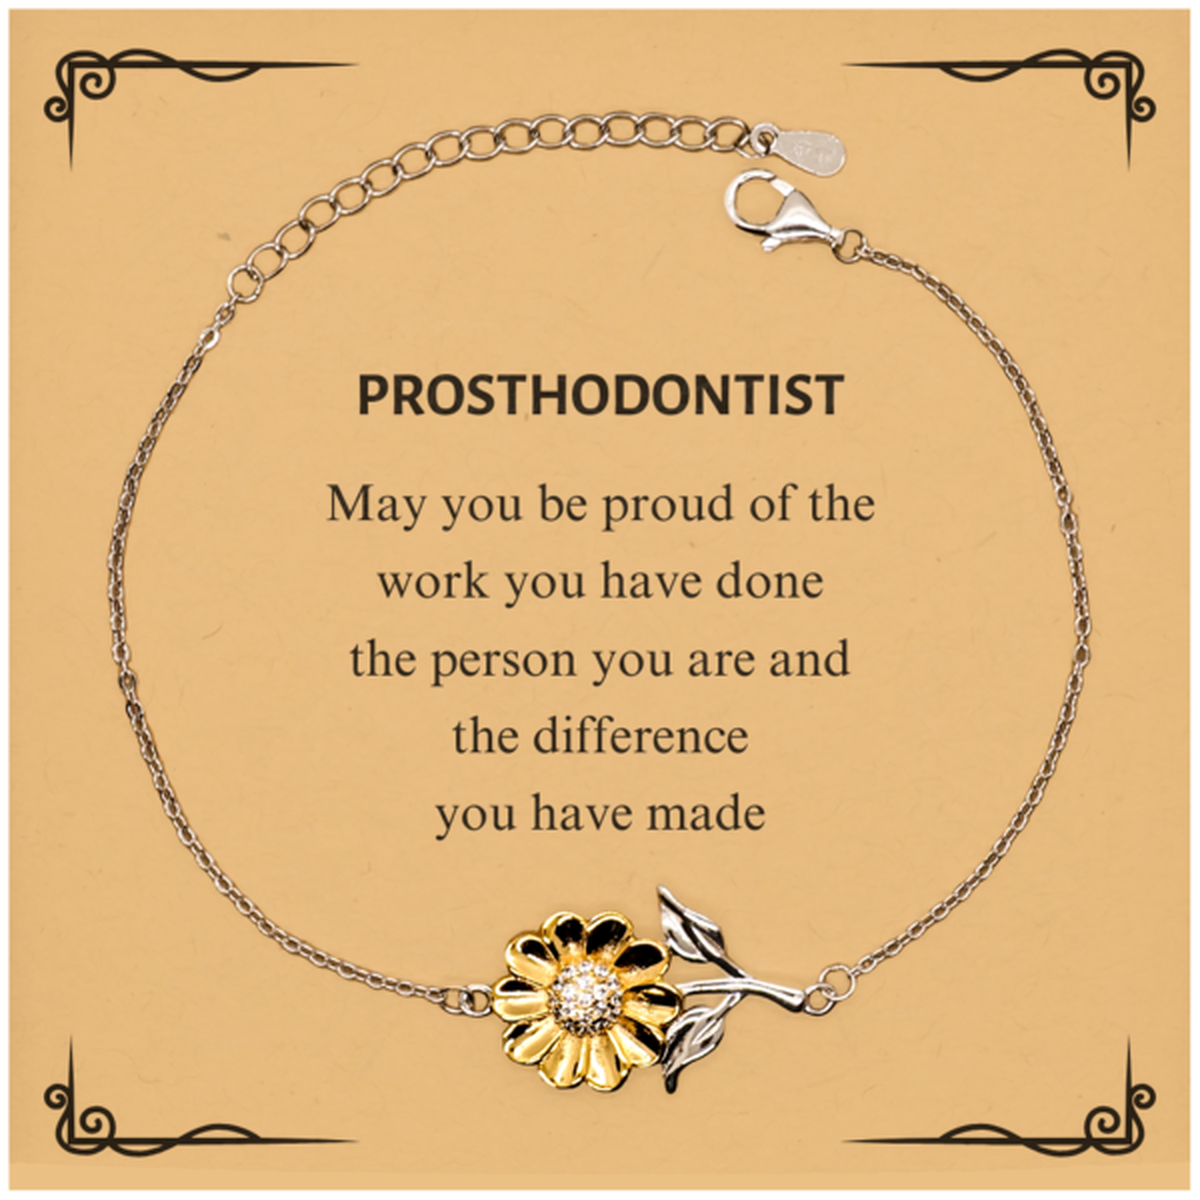 Prosthodontist May you be proud of the work you have done, Retirement Prosthodontist Sunflower Bracelet for Colleague Appreciation Gifts Amazing for Prosthodontist